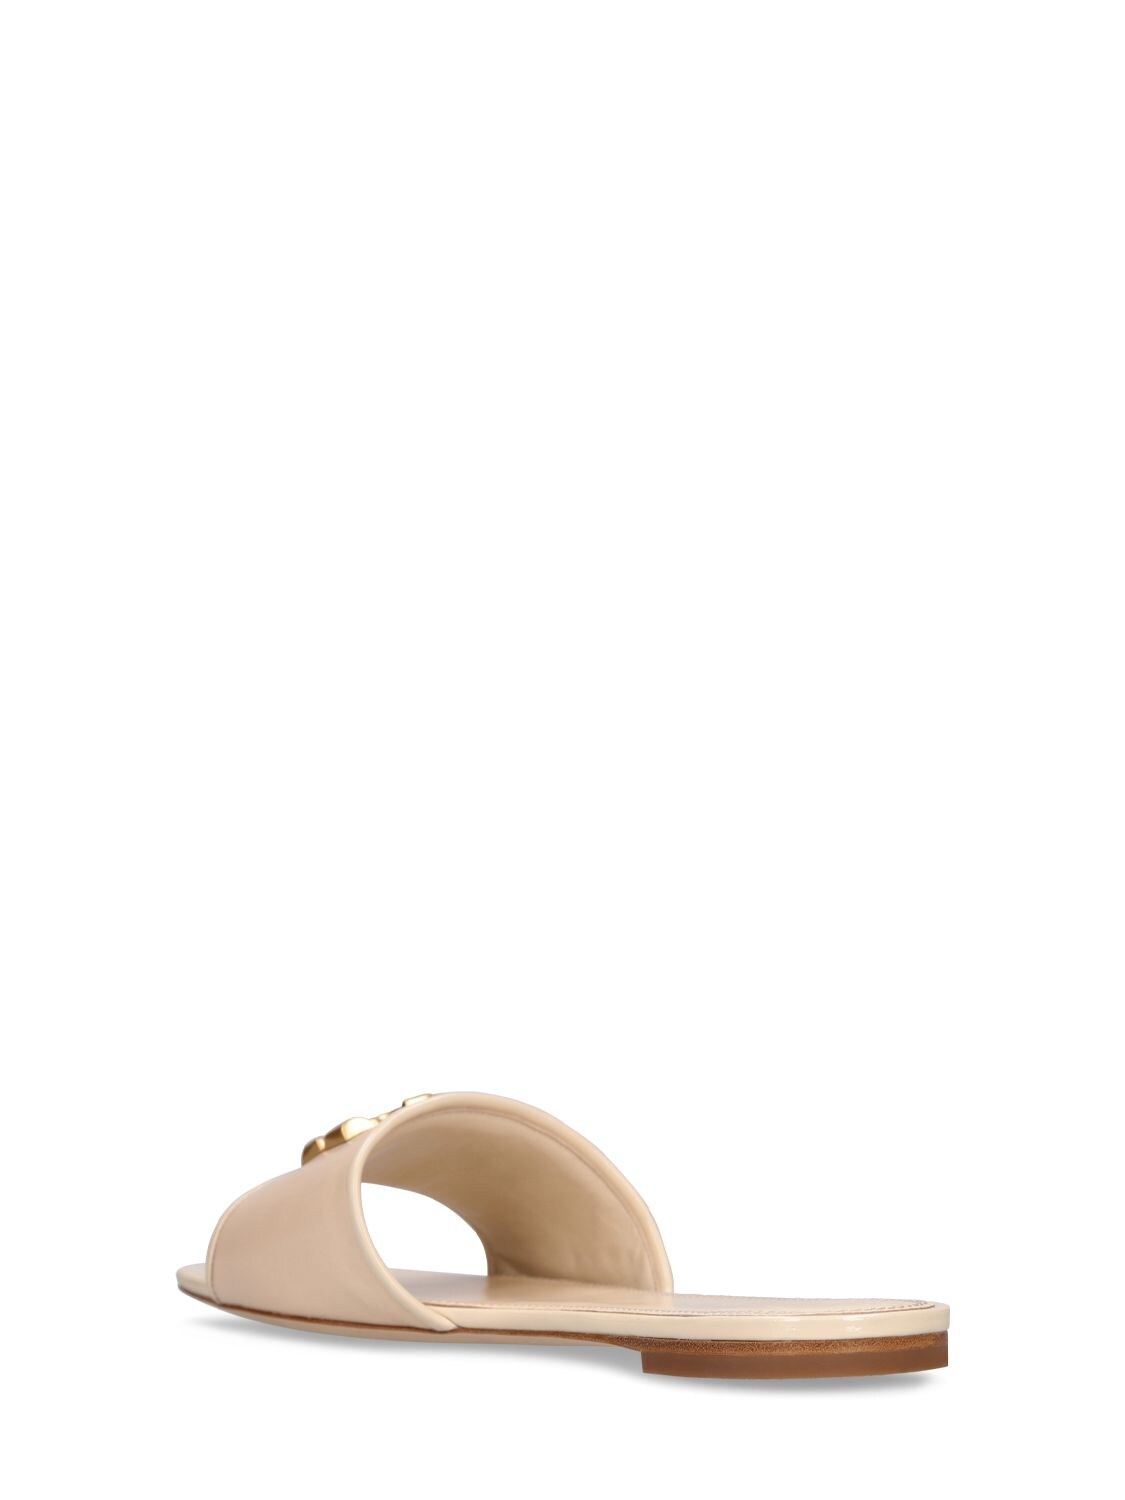 Shop Tory Burch 10mm Eleanor Leather Slide Sandals In Cream